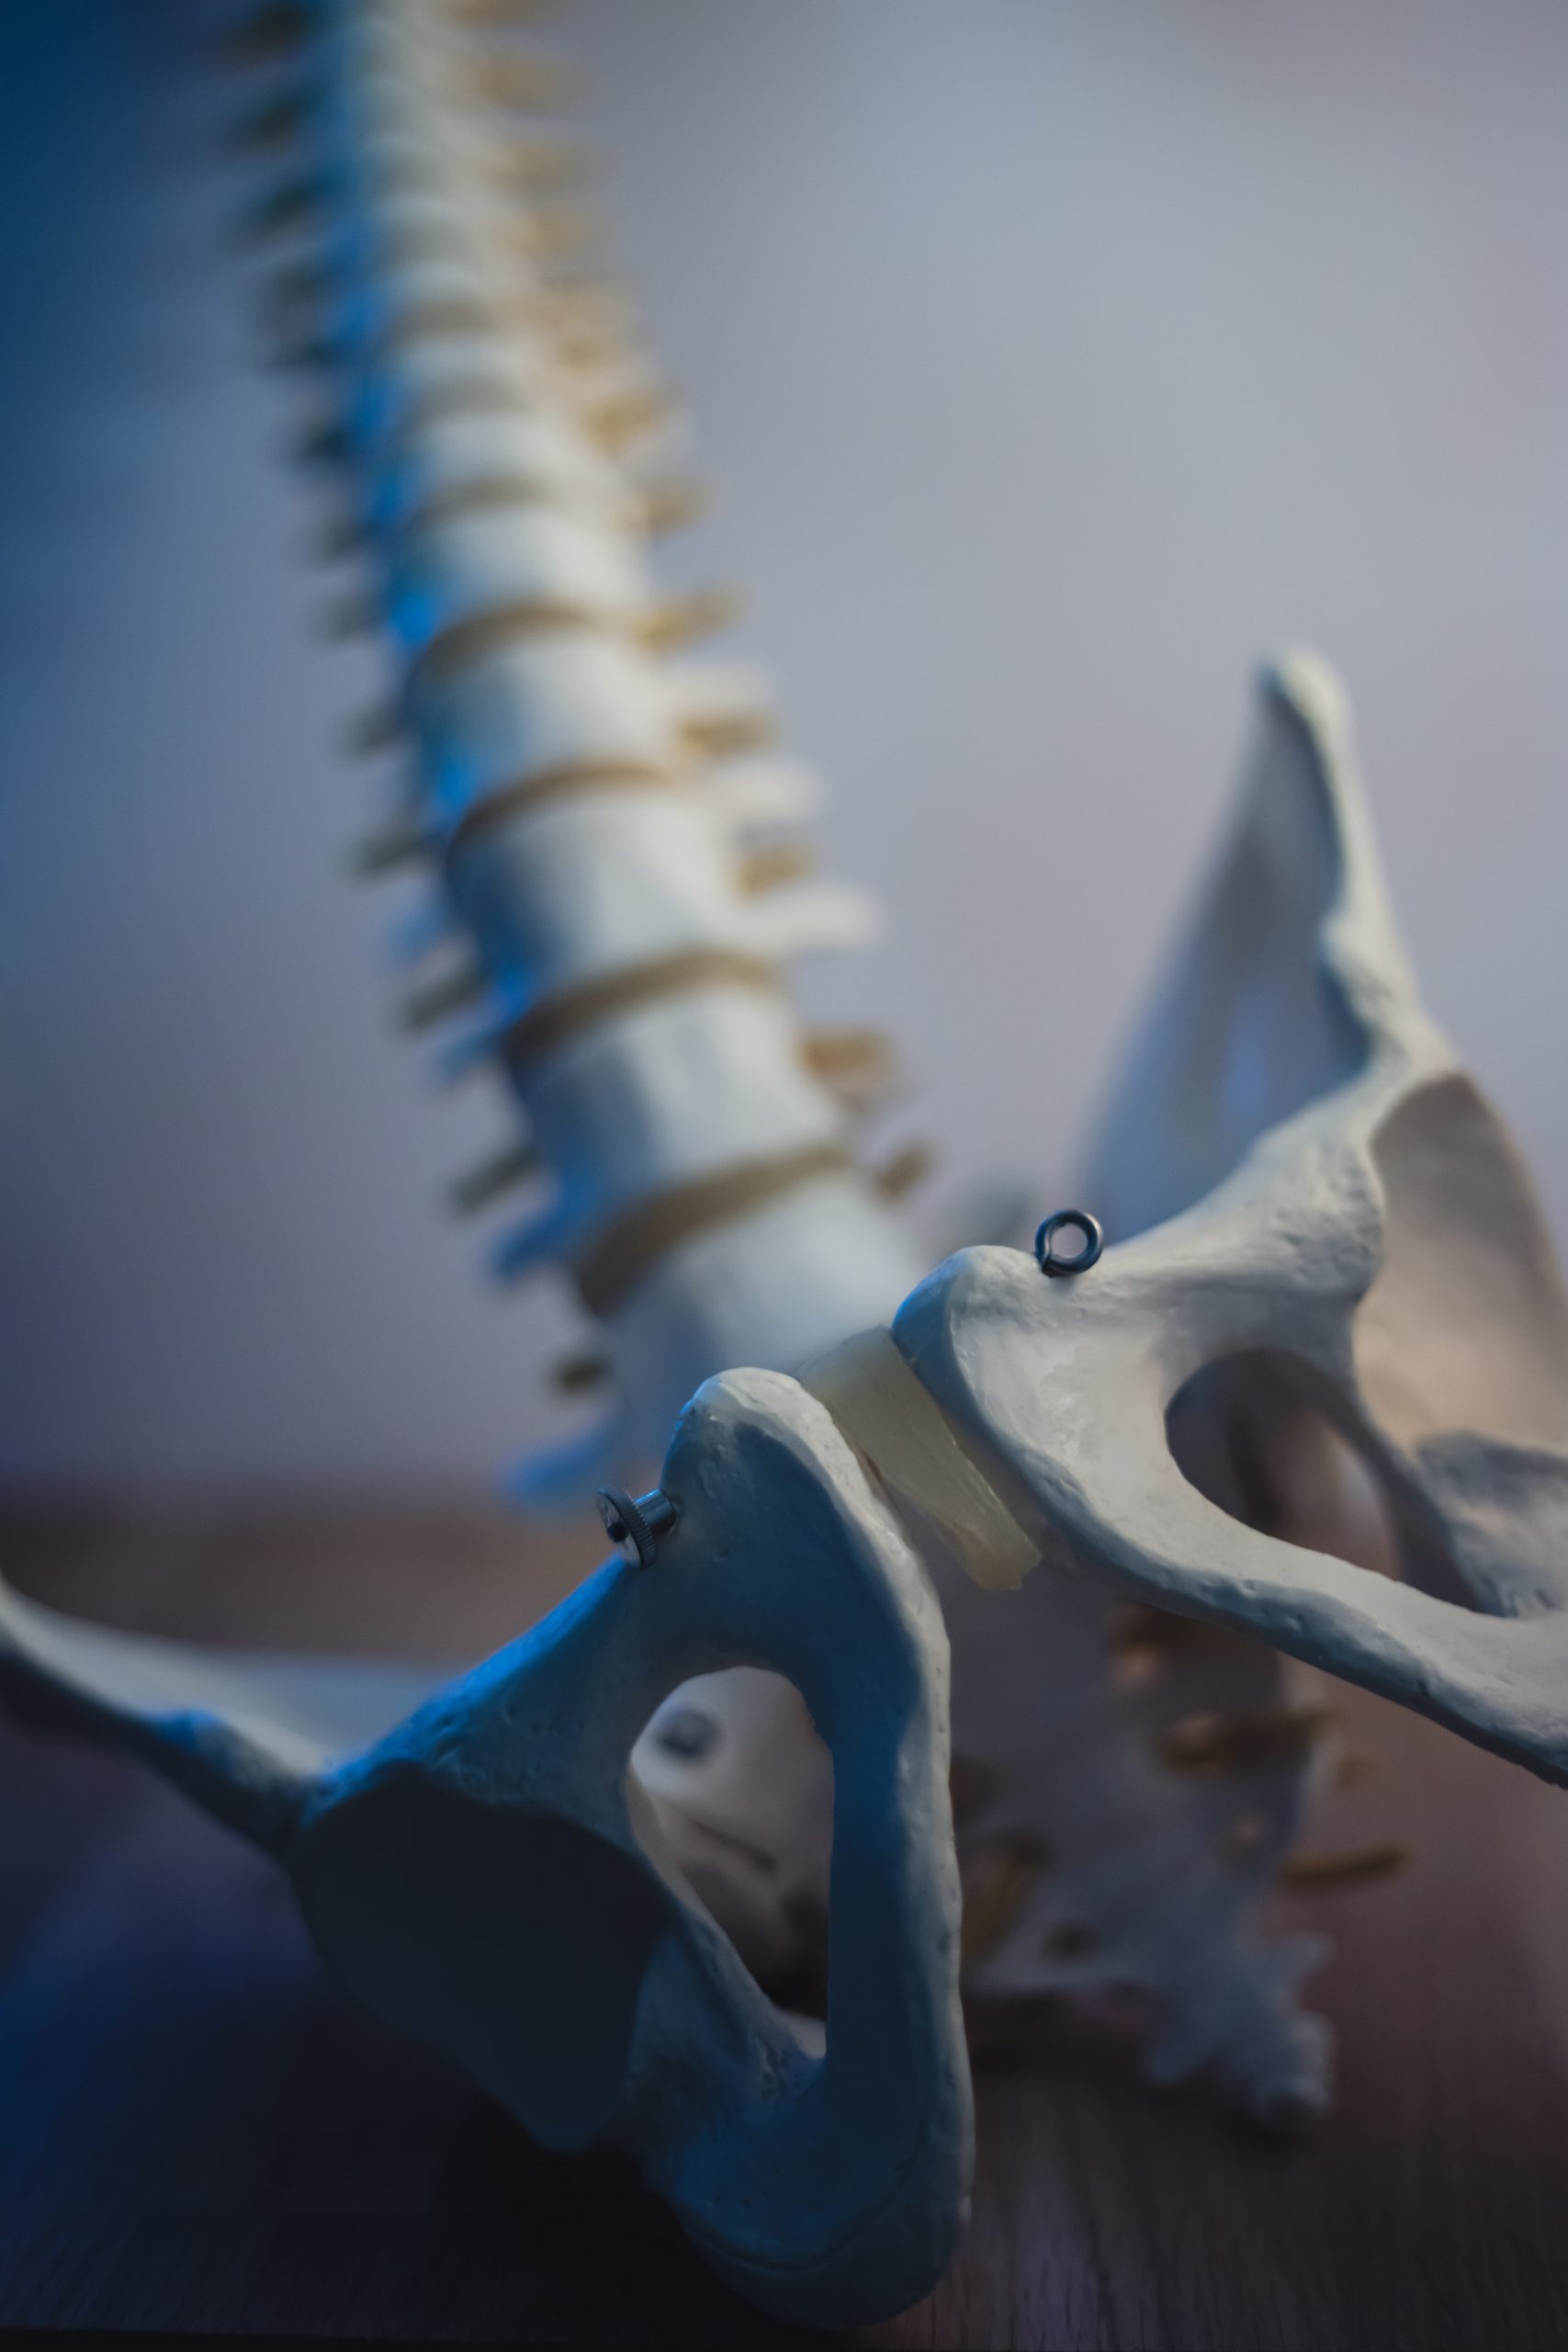 How to Treat Tailbone Pain with Physical Therapy - Atlanta PT